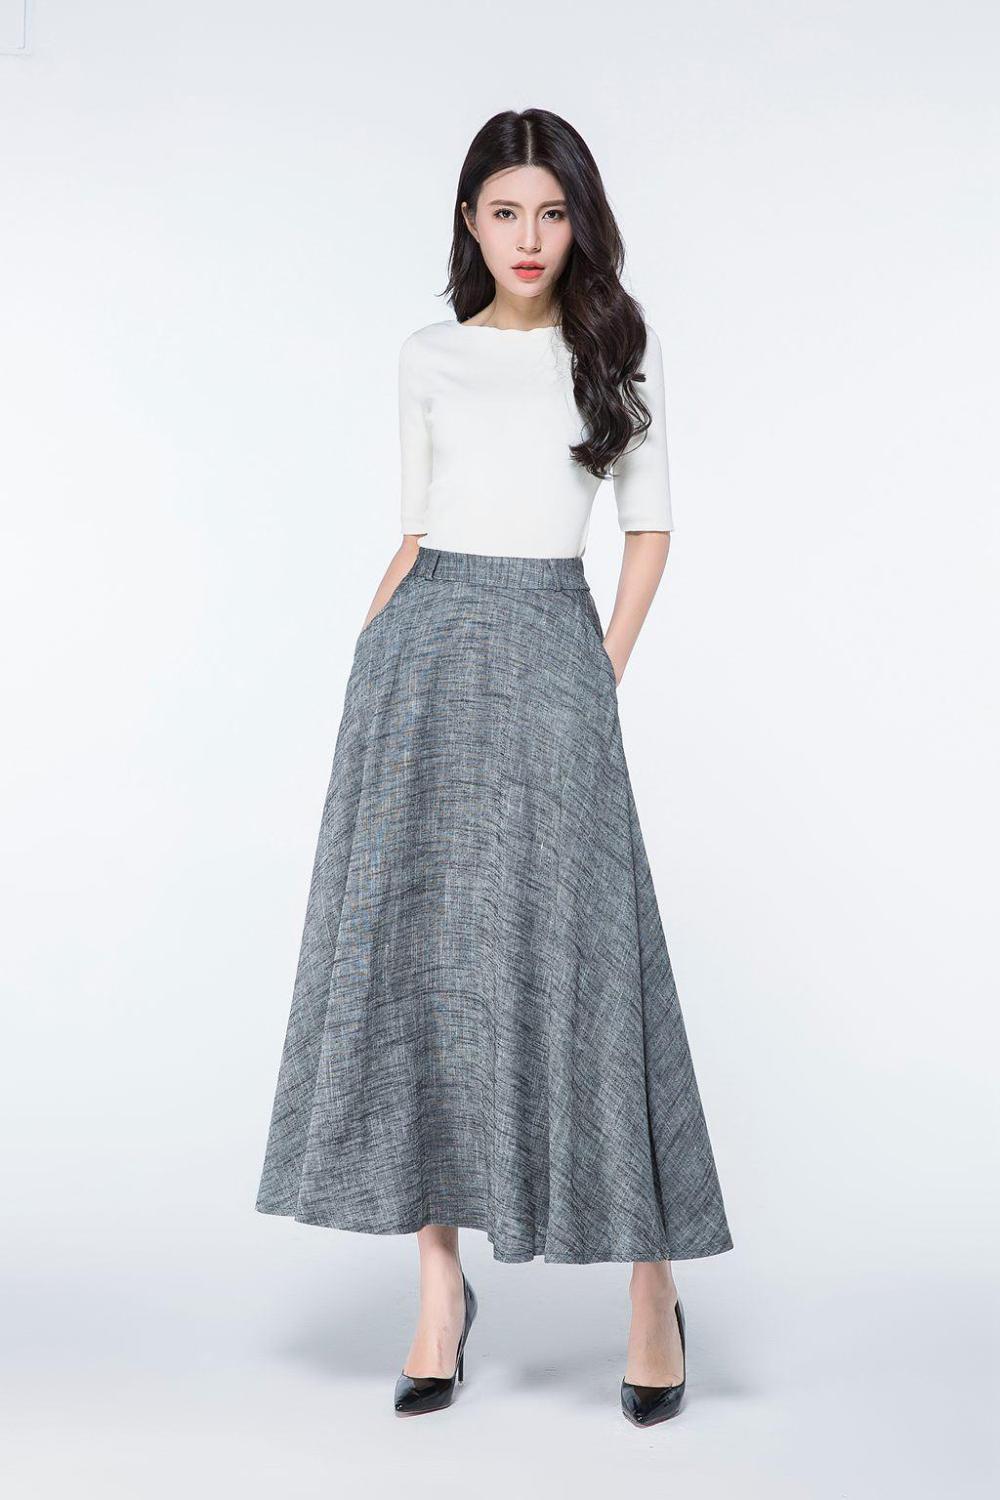 Lining Skirts - Buy Lining Skirts Online Starting at Just ₹201